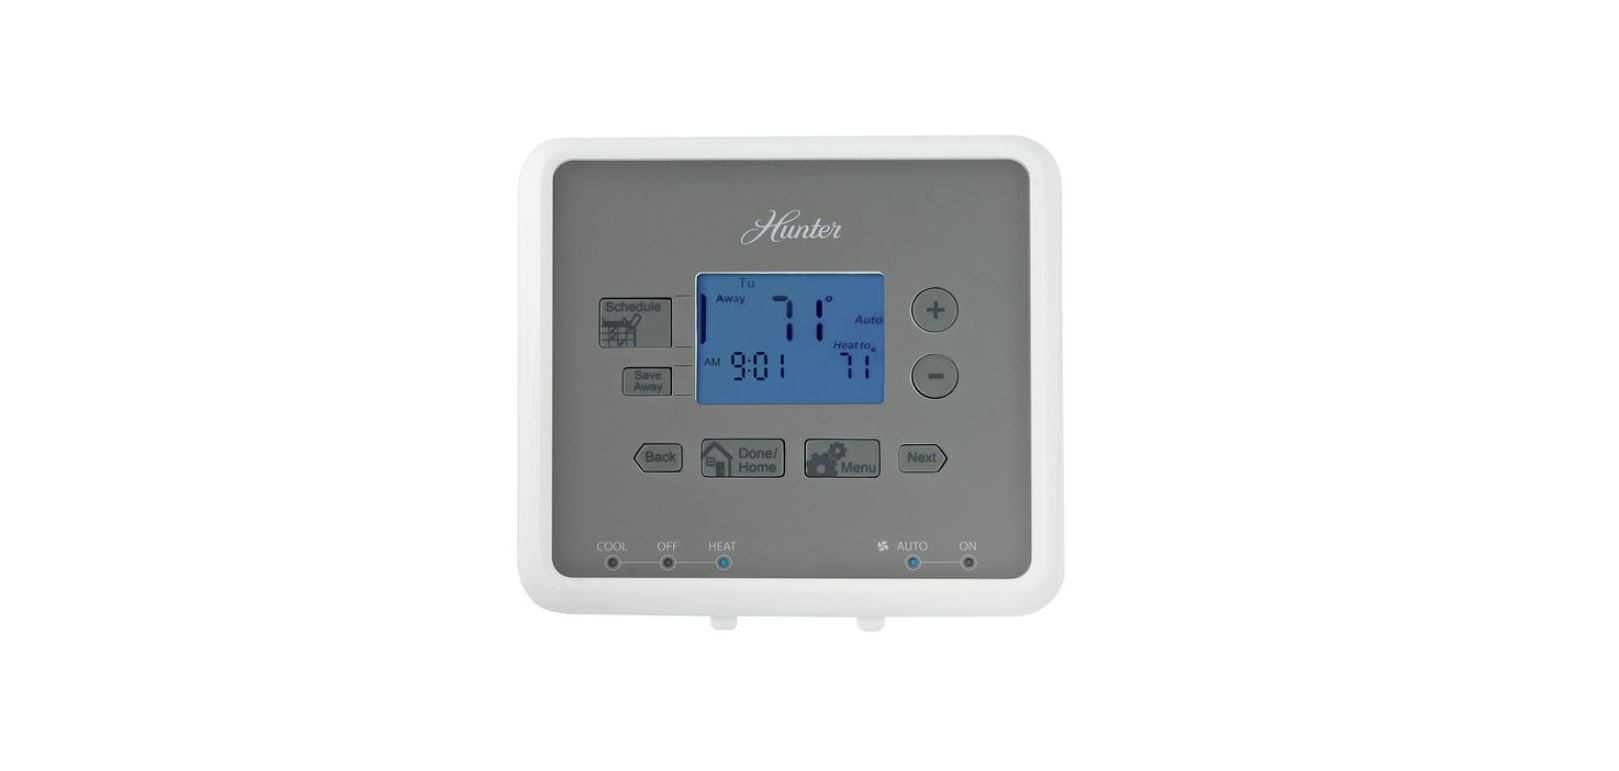 Hunter 44127 Programmable Thermostat Owner Manual